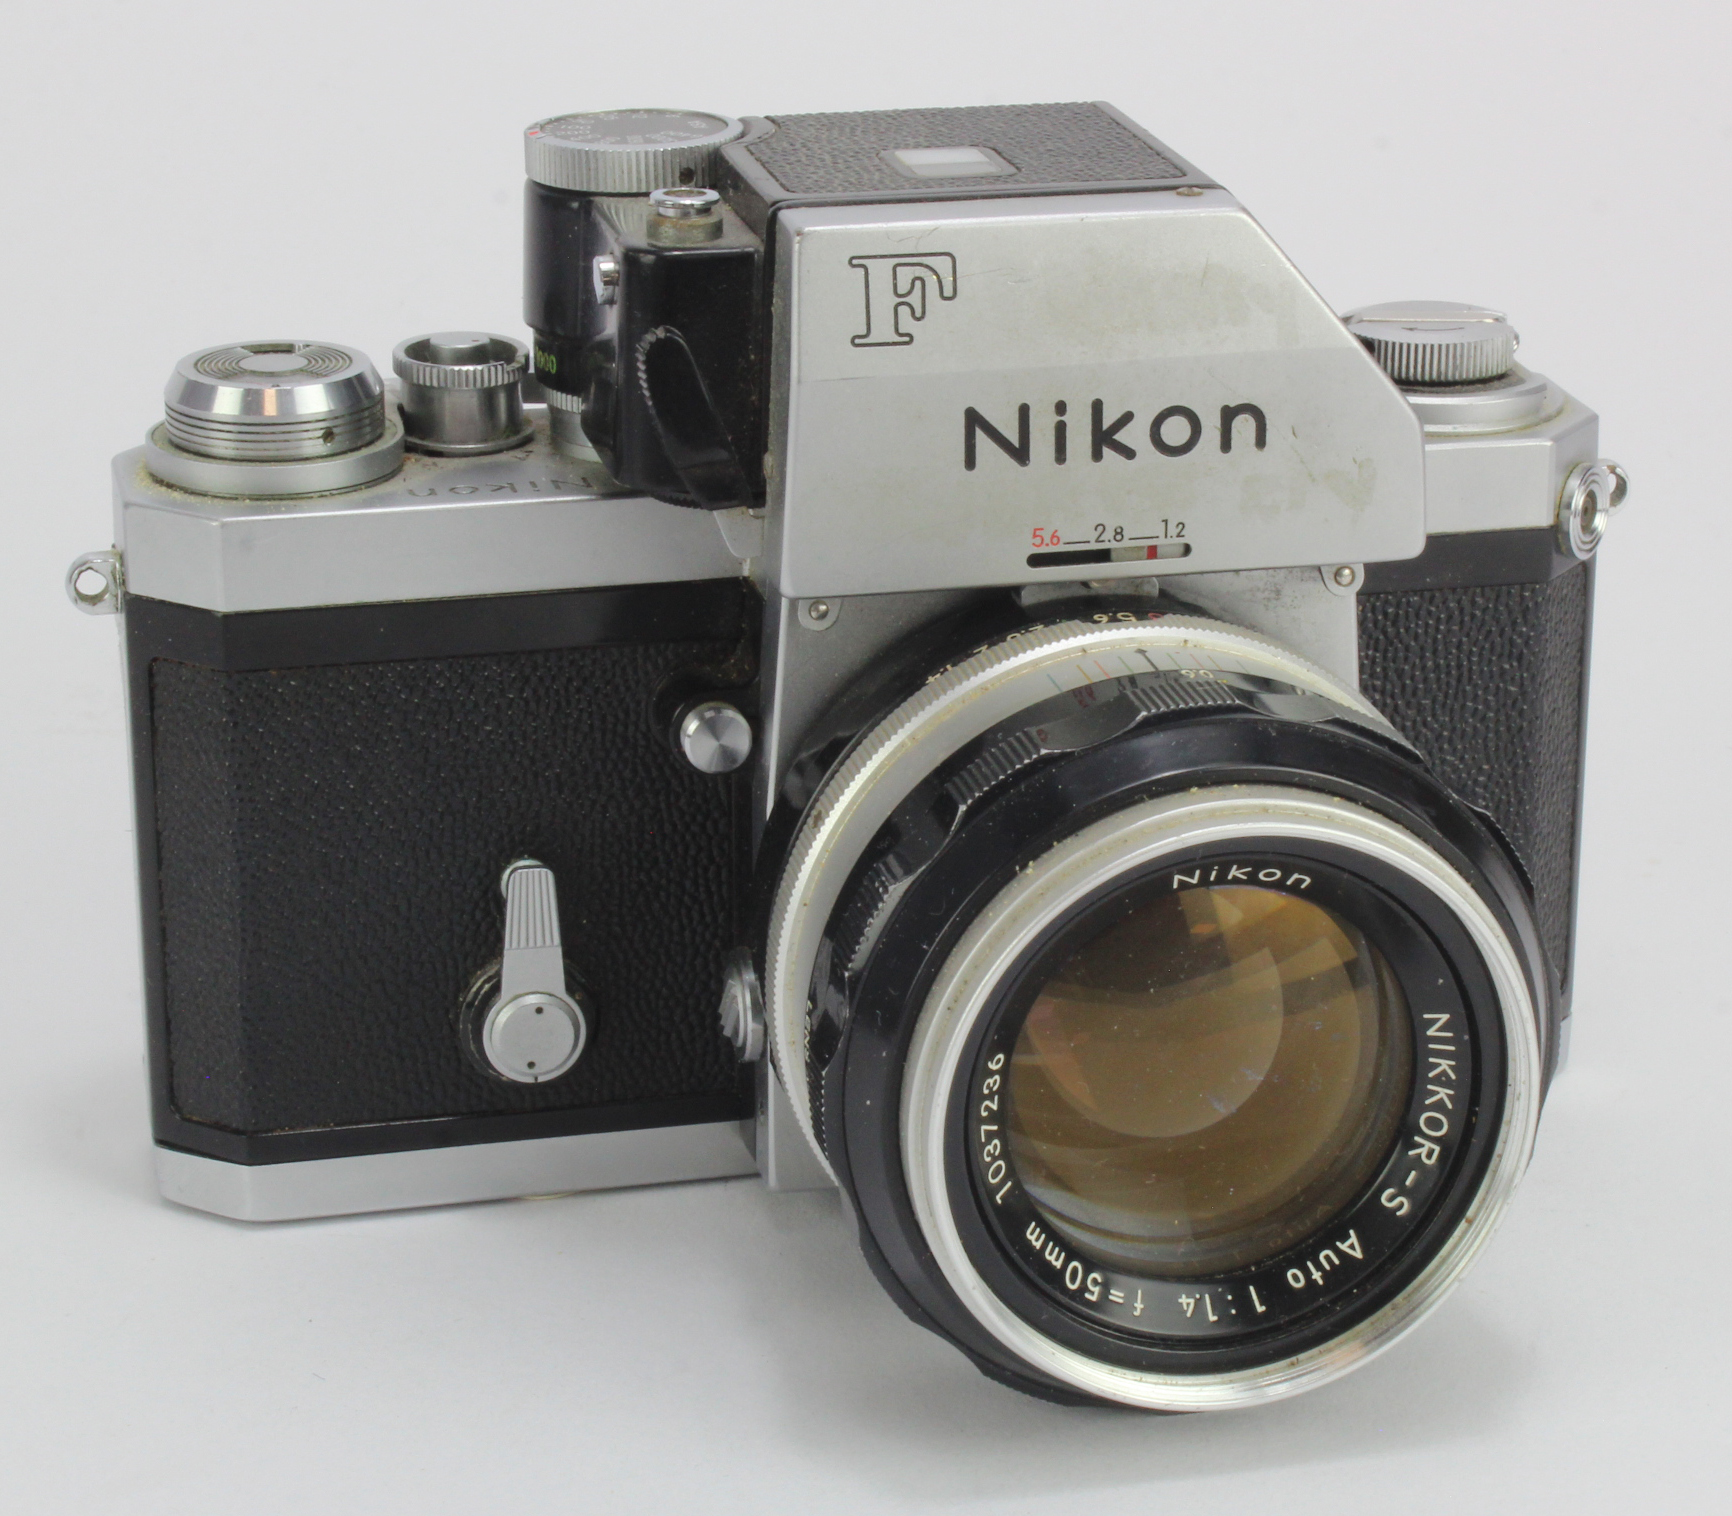 Nikon F Photomic camera (serial no. 7147866), with Nikkor S Auto 1:1.4 f=50mm lens (1037236),